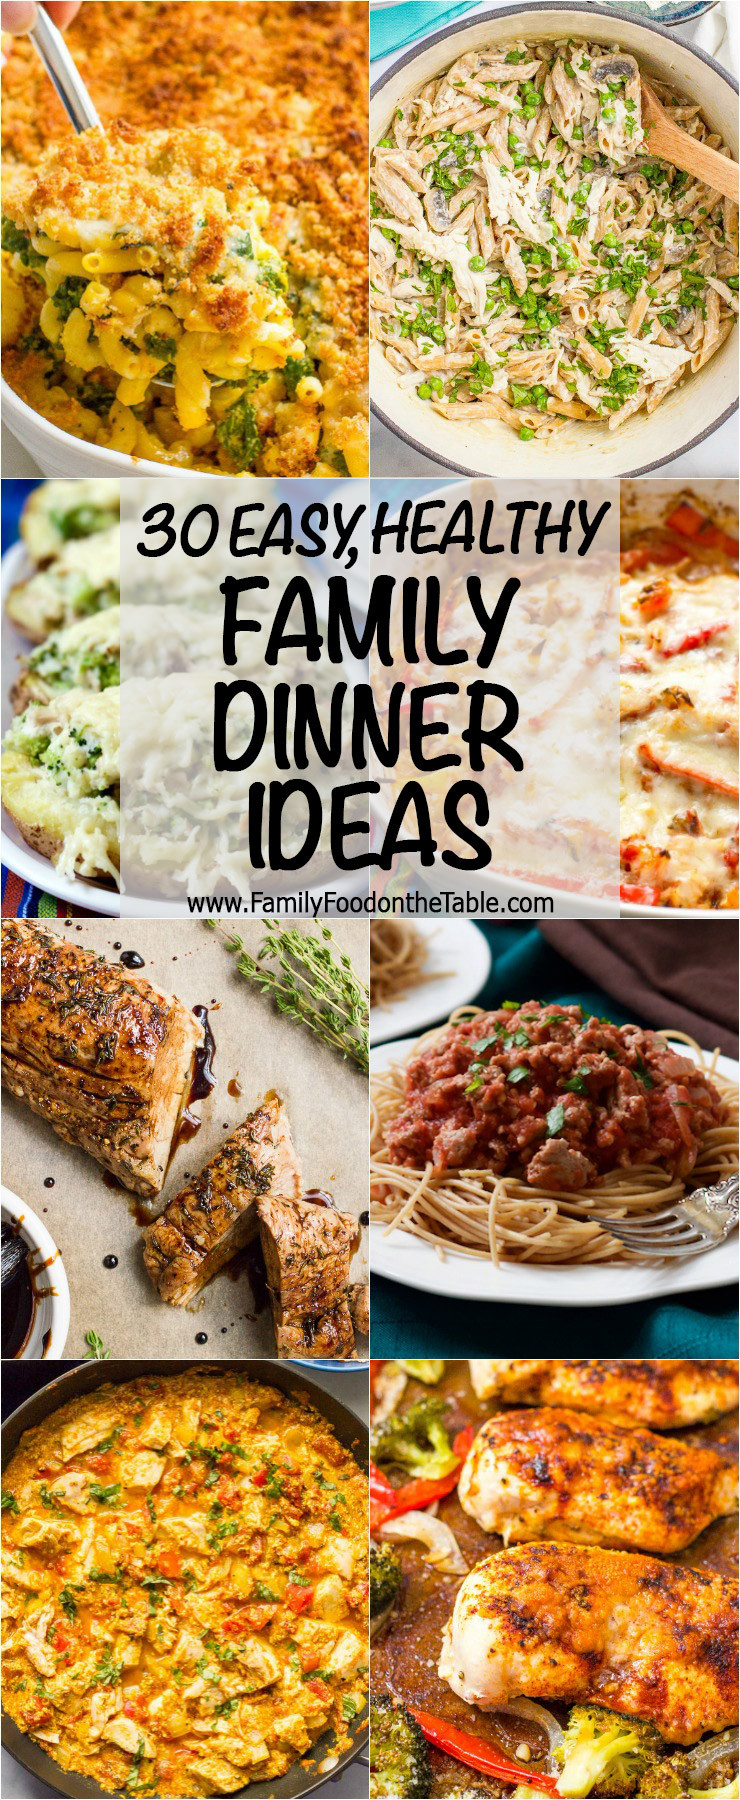 Easy Dinners For Families
 30 easy healthy family dinner ideas Family Food on the Table